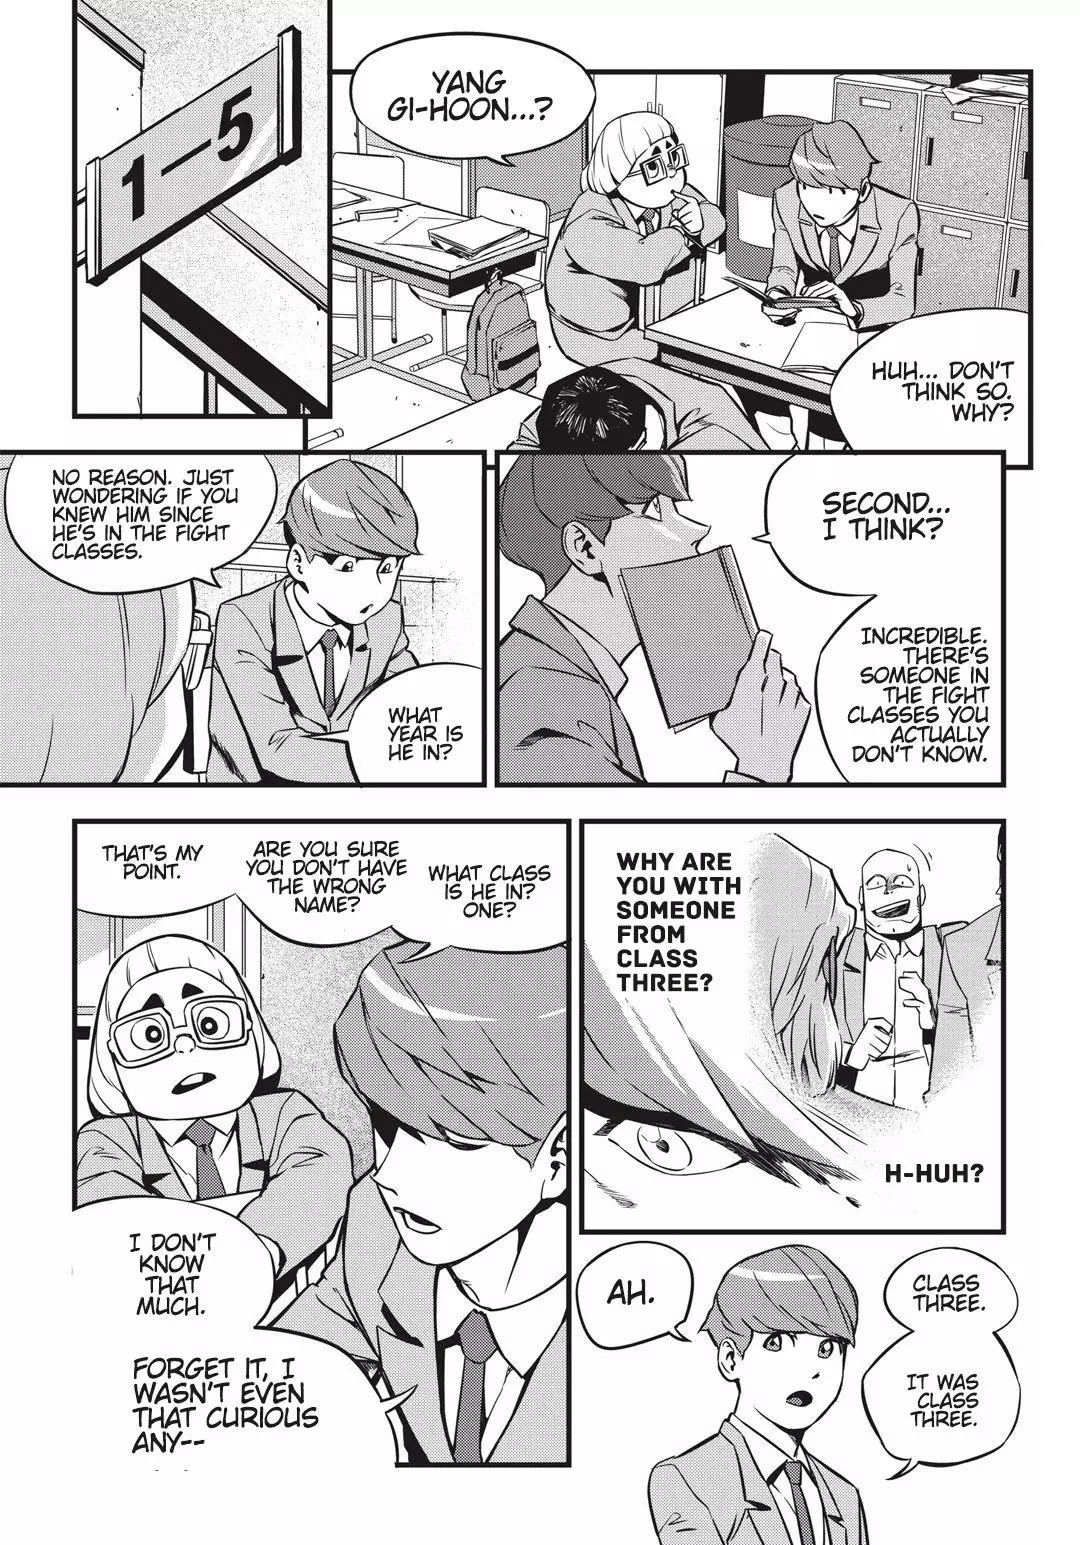 Fight Class 3 - 3 page 018